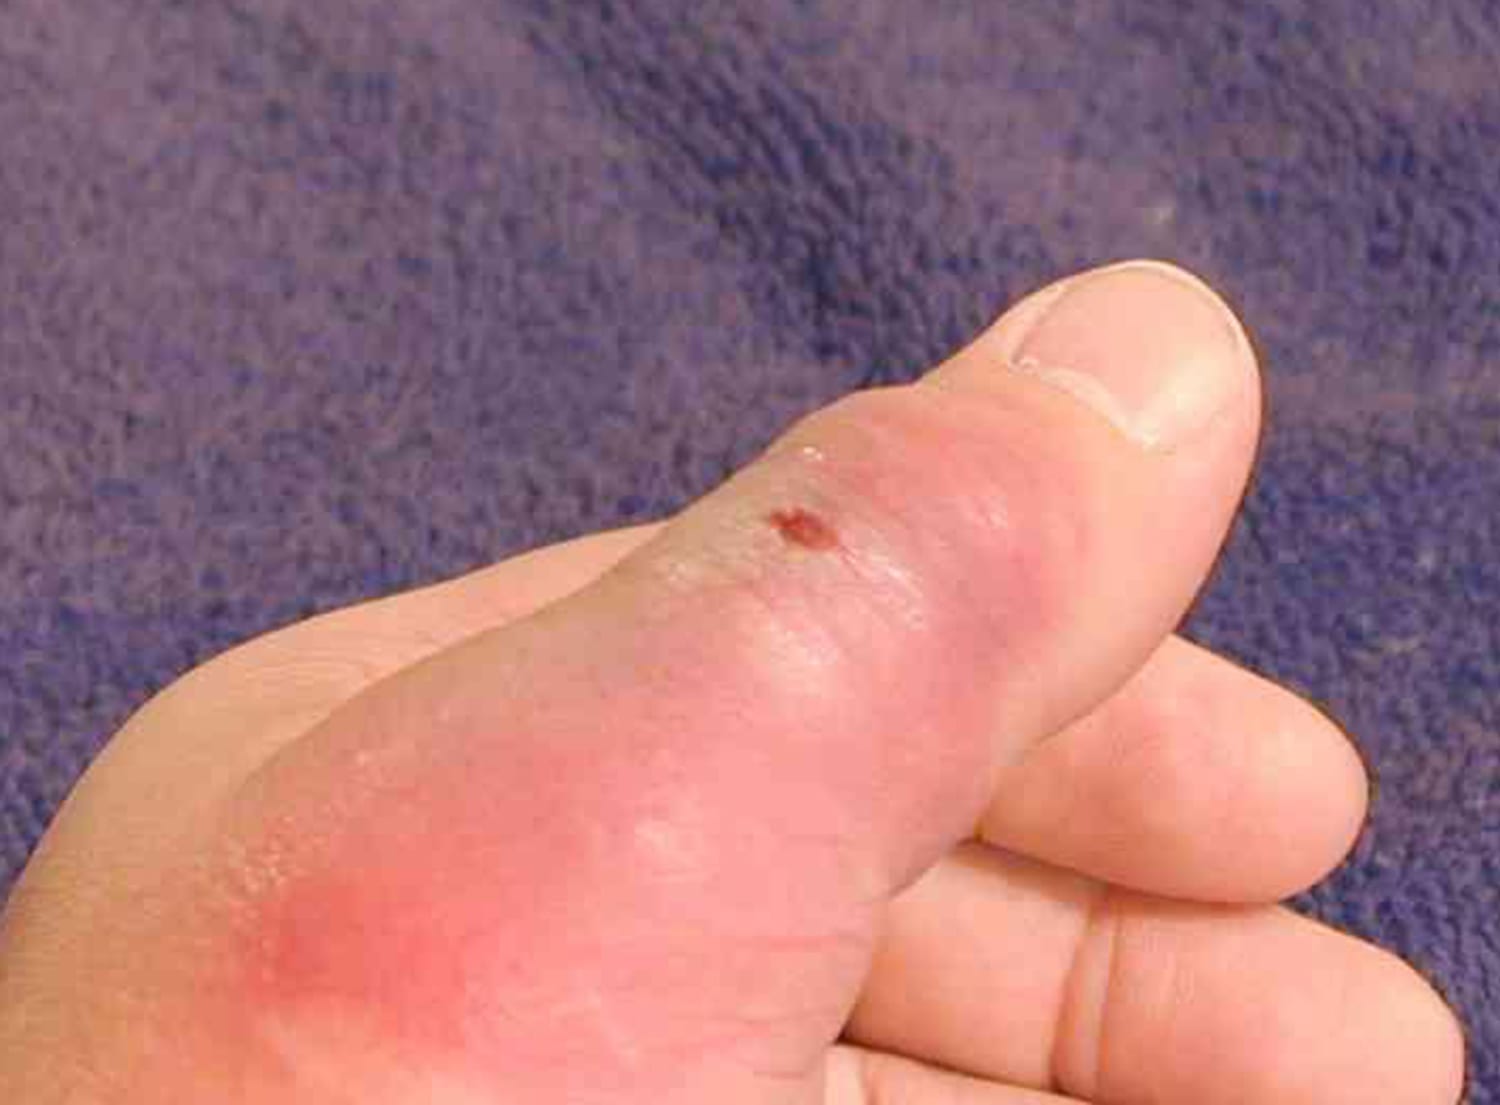 Violin Spider Bite On Hand - Fact or Fiction?